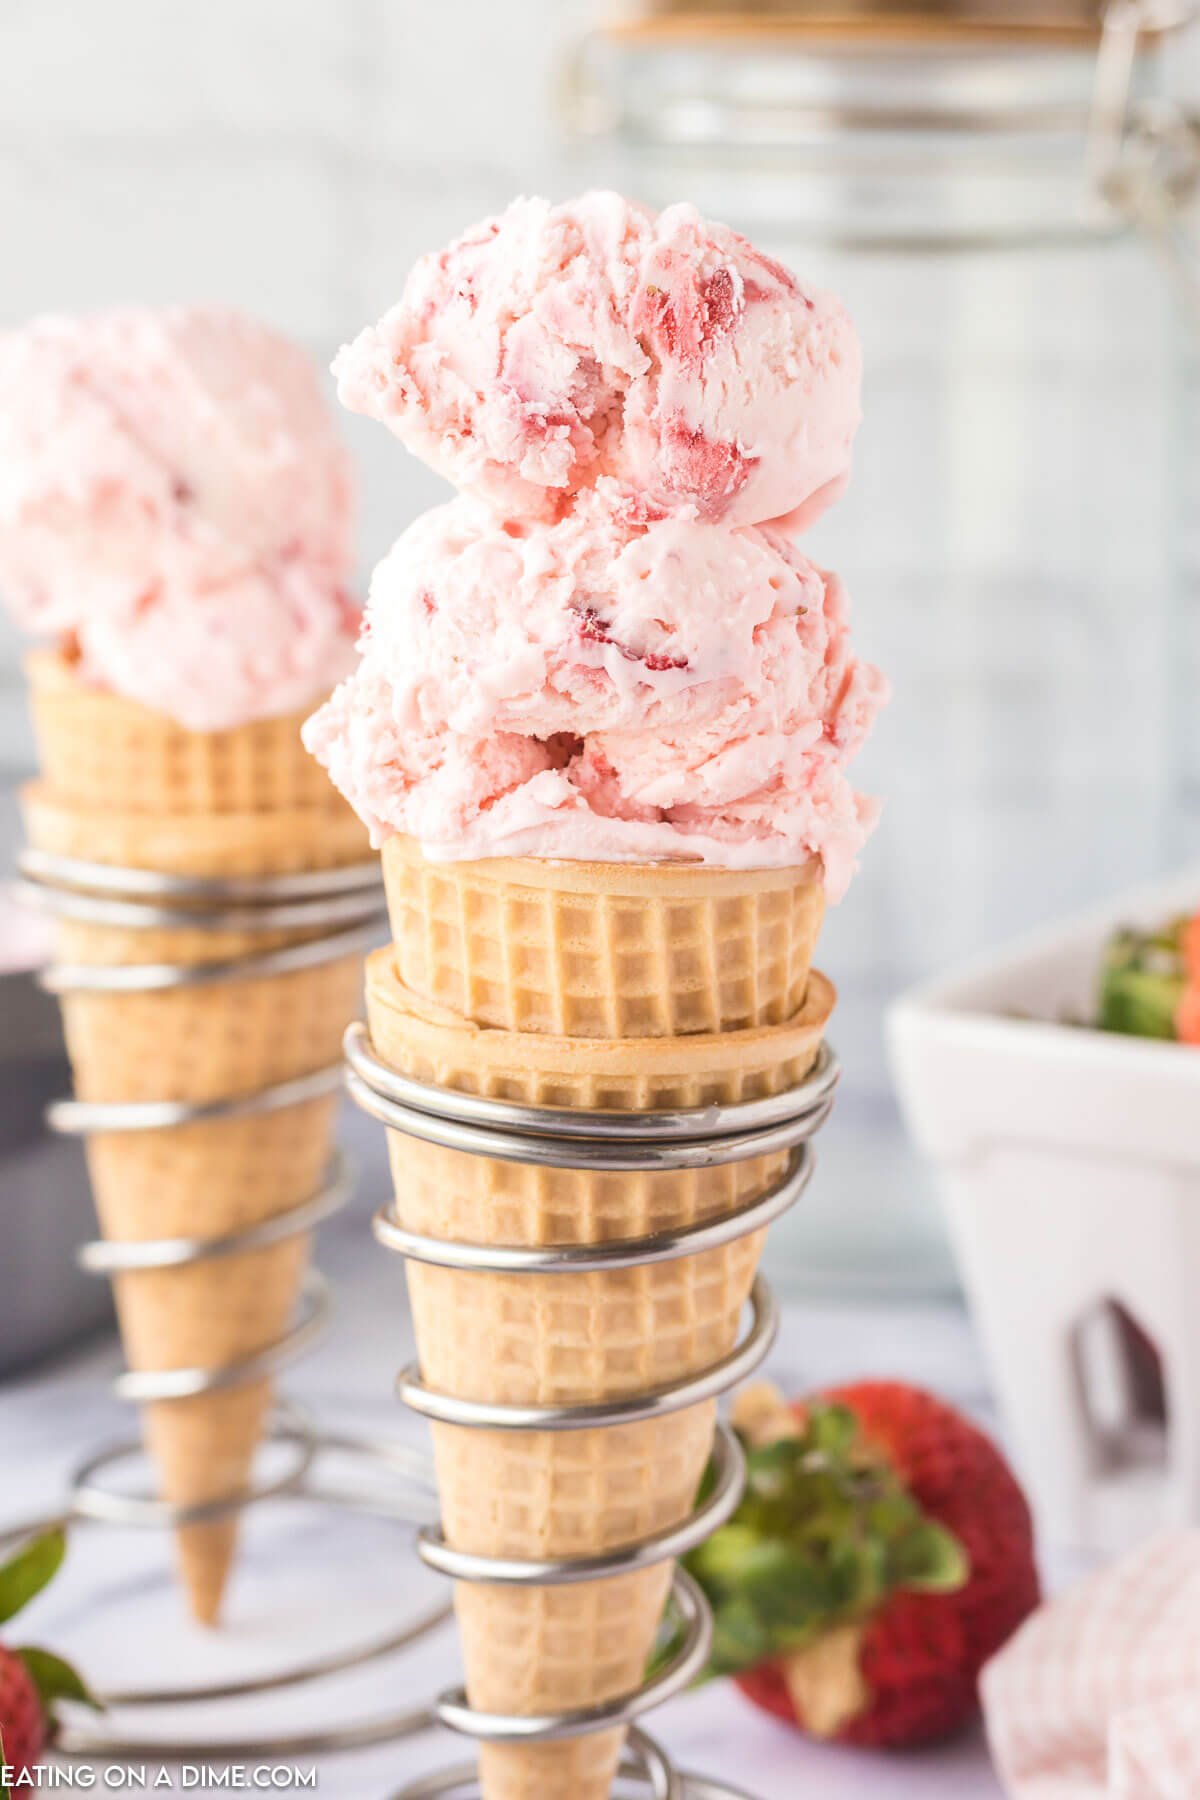 Scoops of Strawberry Ice Cream on a cone